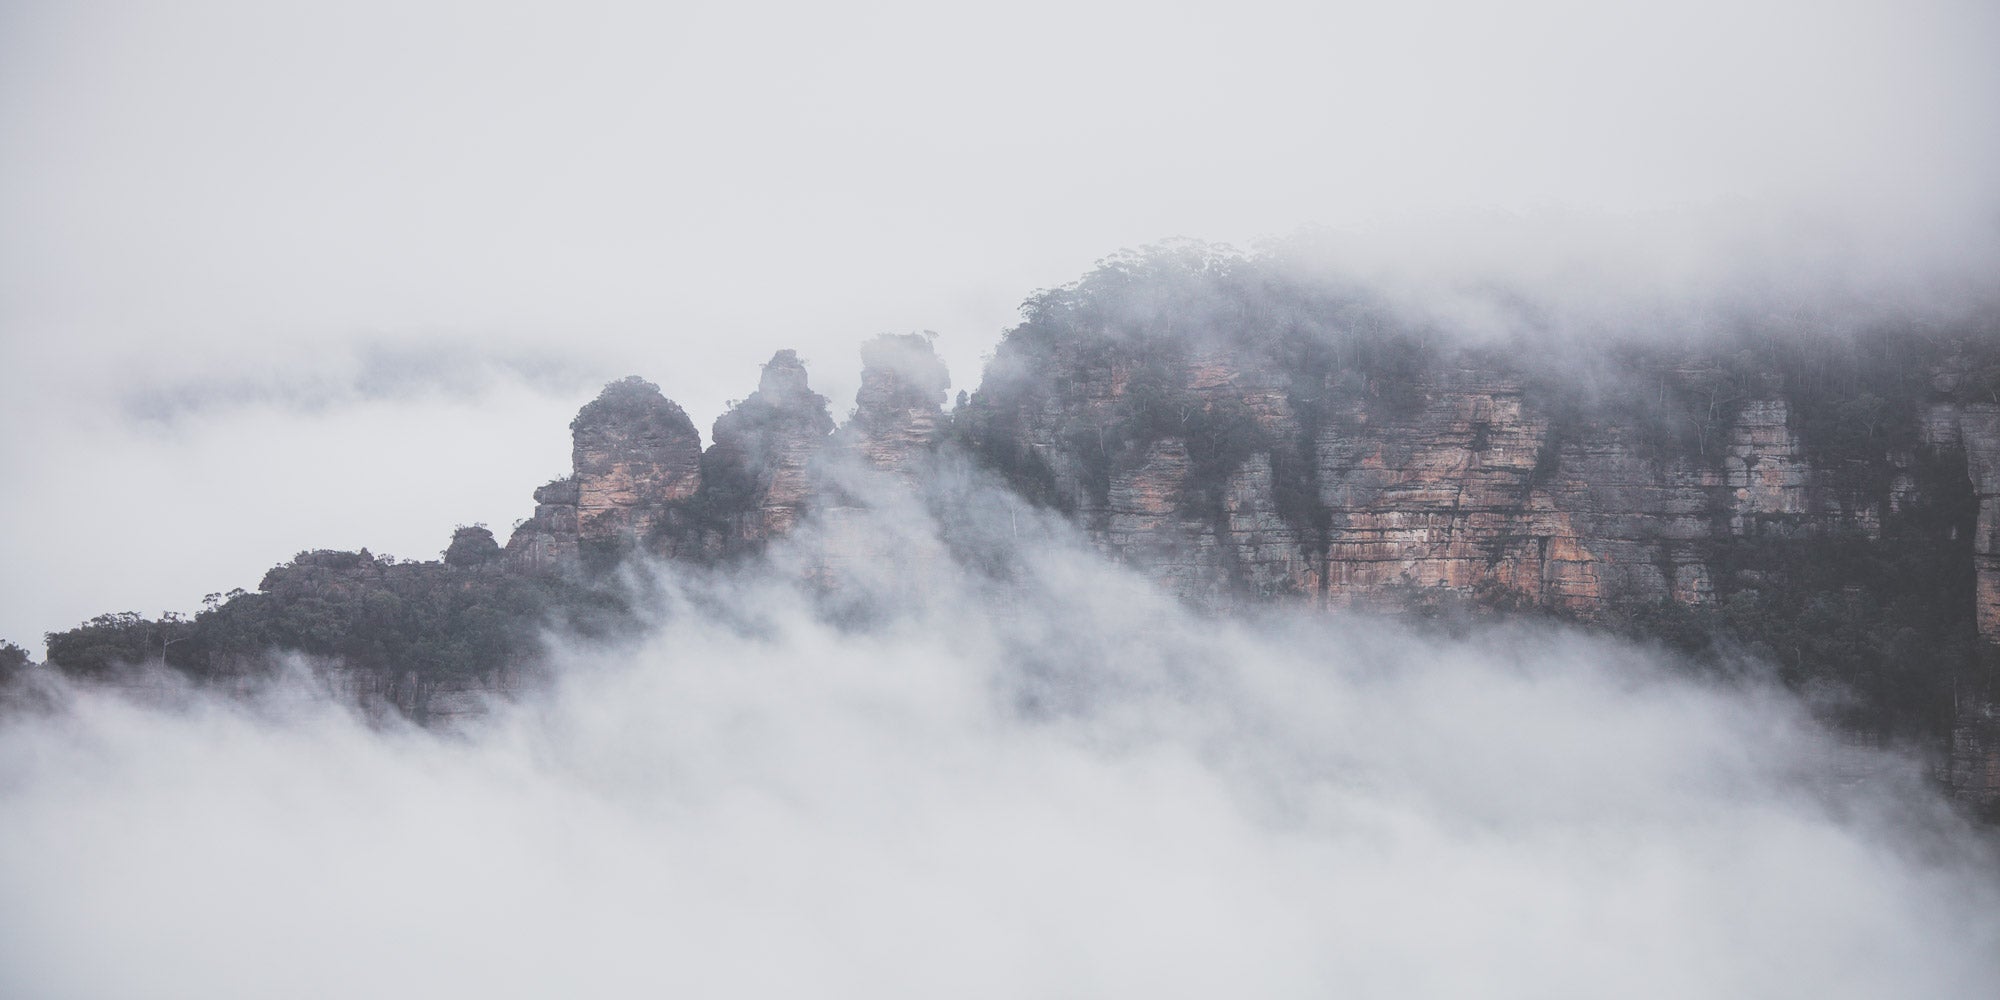 The Three Sisters rock formation in Sydney, Australia, is enshrouded in mist, as viewed from Sublime Point.